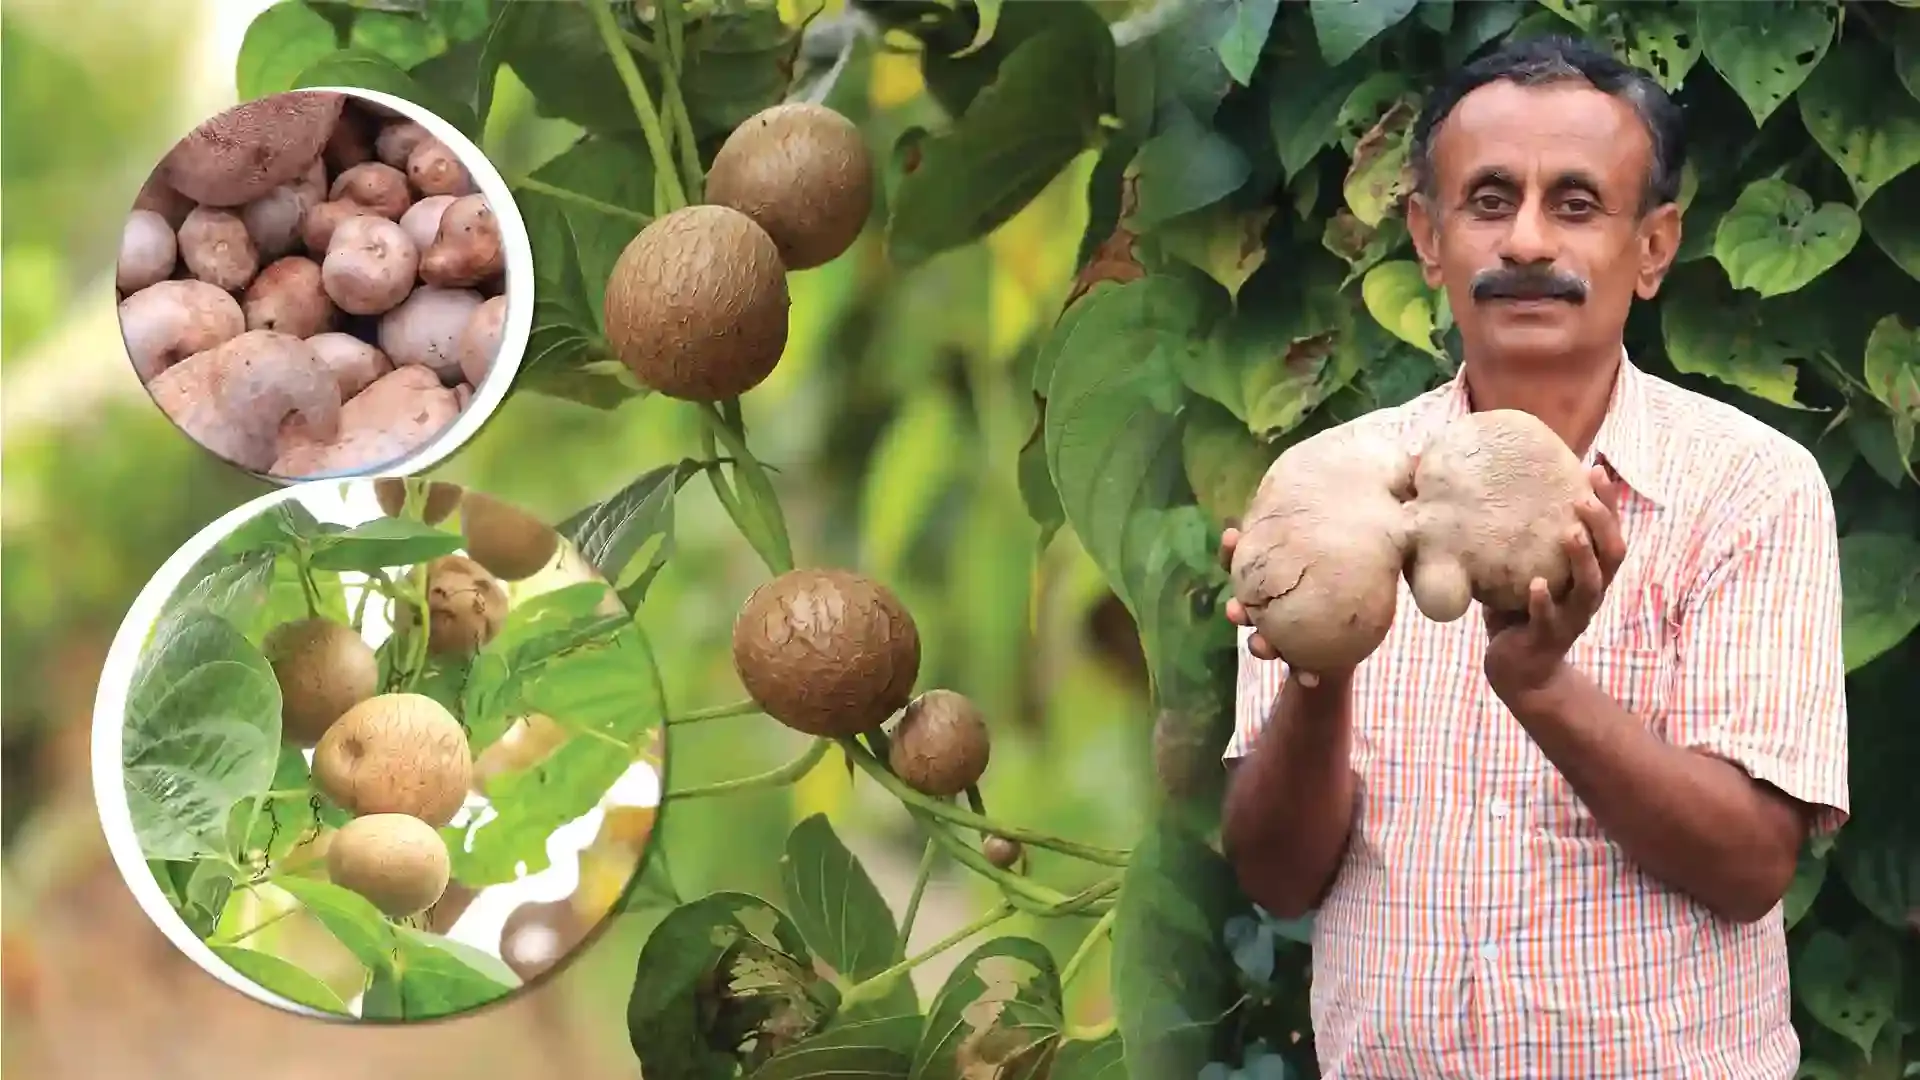 Course Trailer: Air Potato Farming - Earn Rs. 7 Lakh Per Acre Per Year!. Watch to know more.